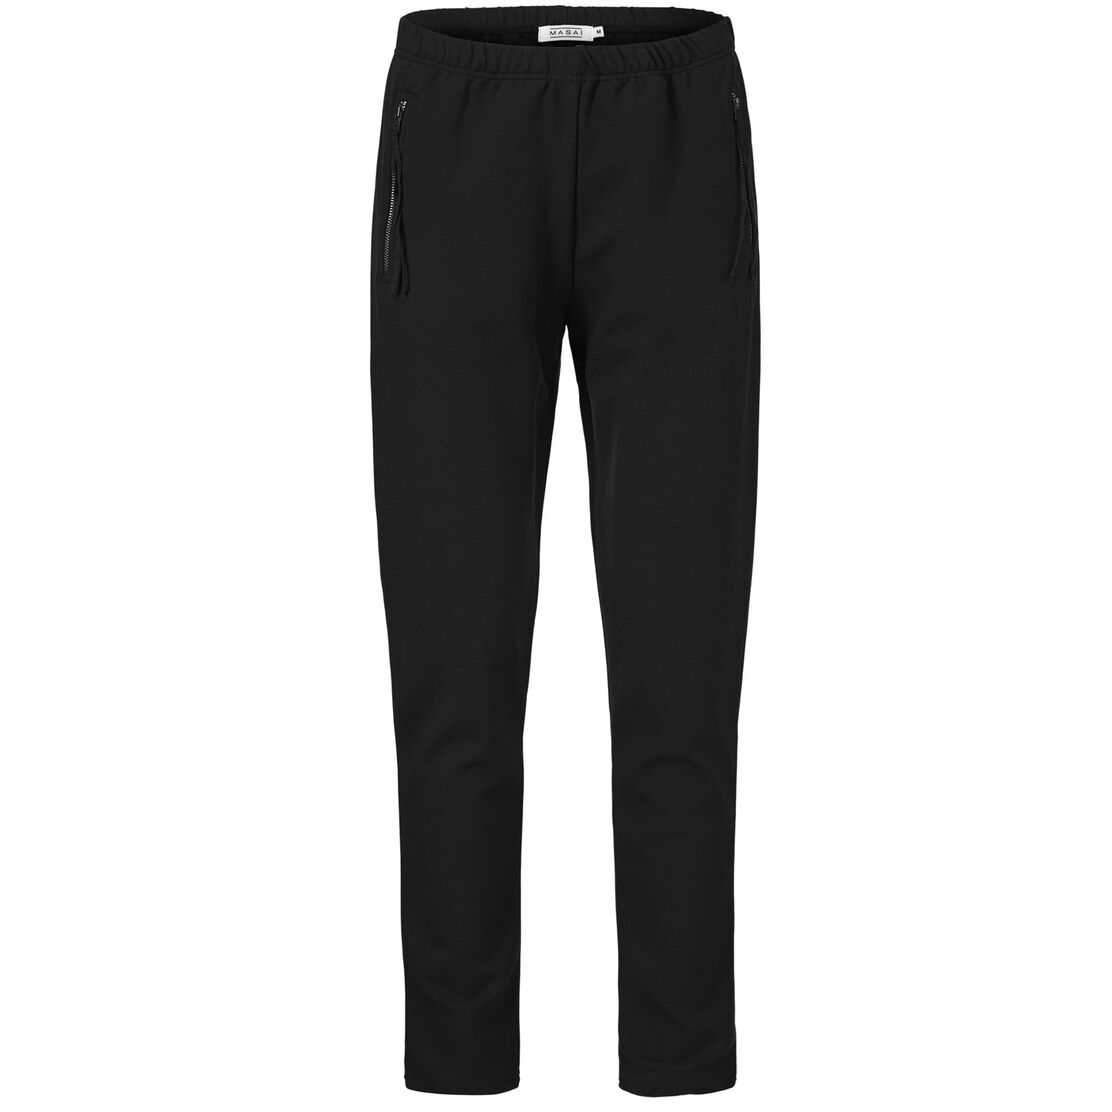 PERRY JERSEY TROUSERS, Black, hi-res